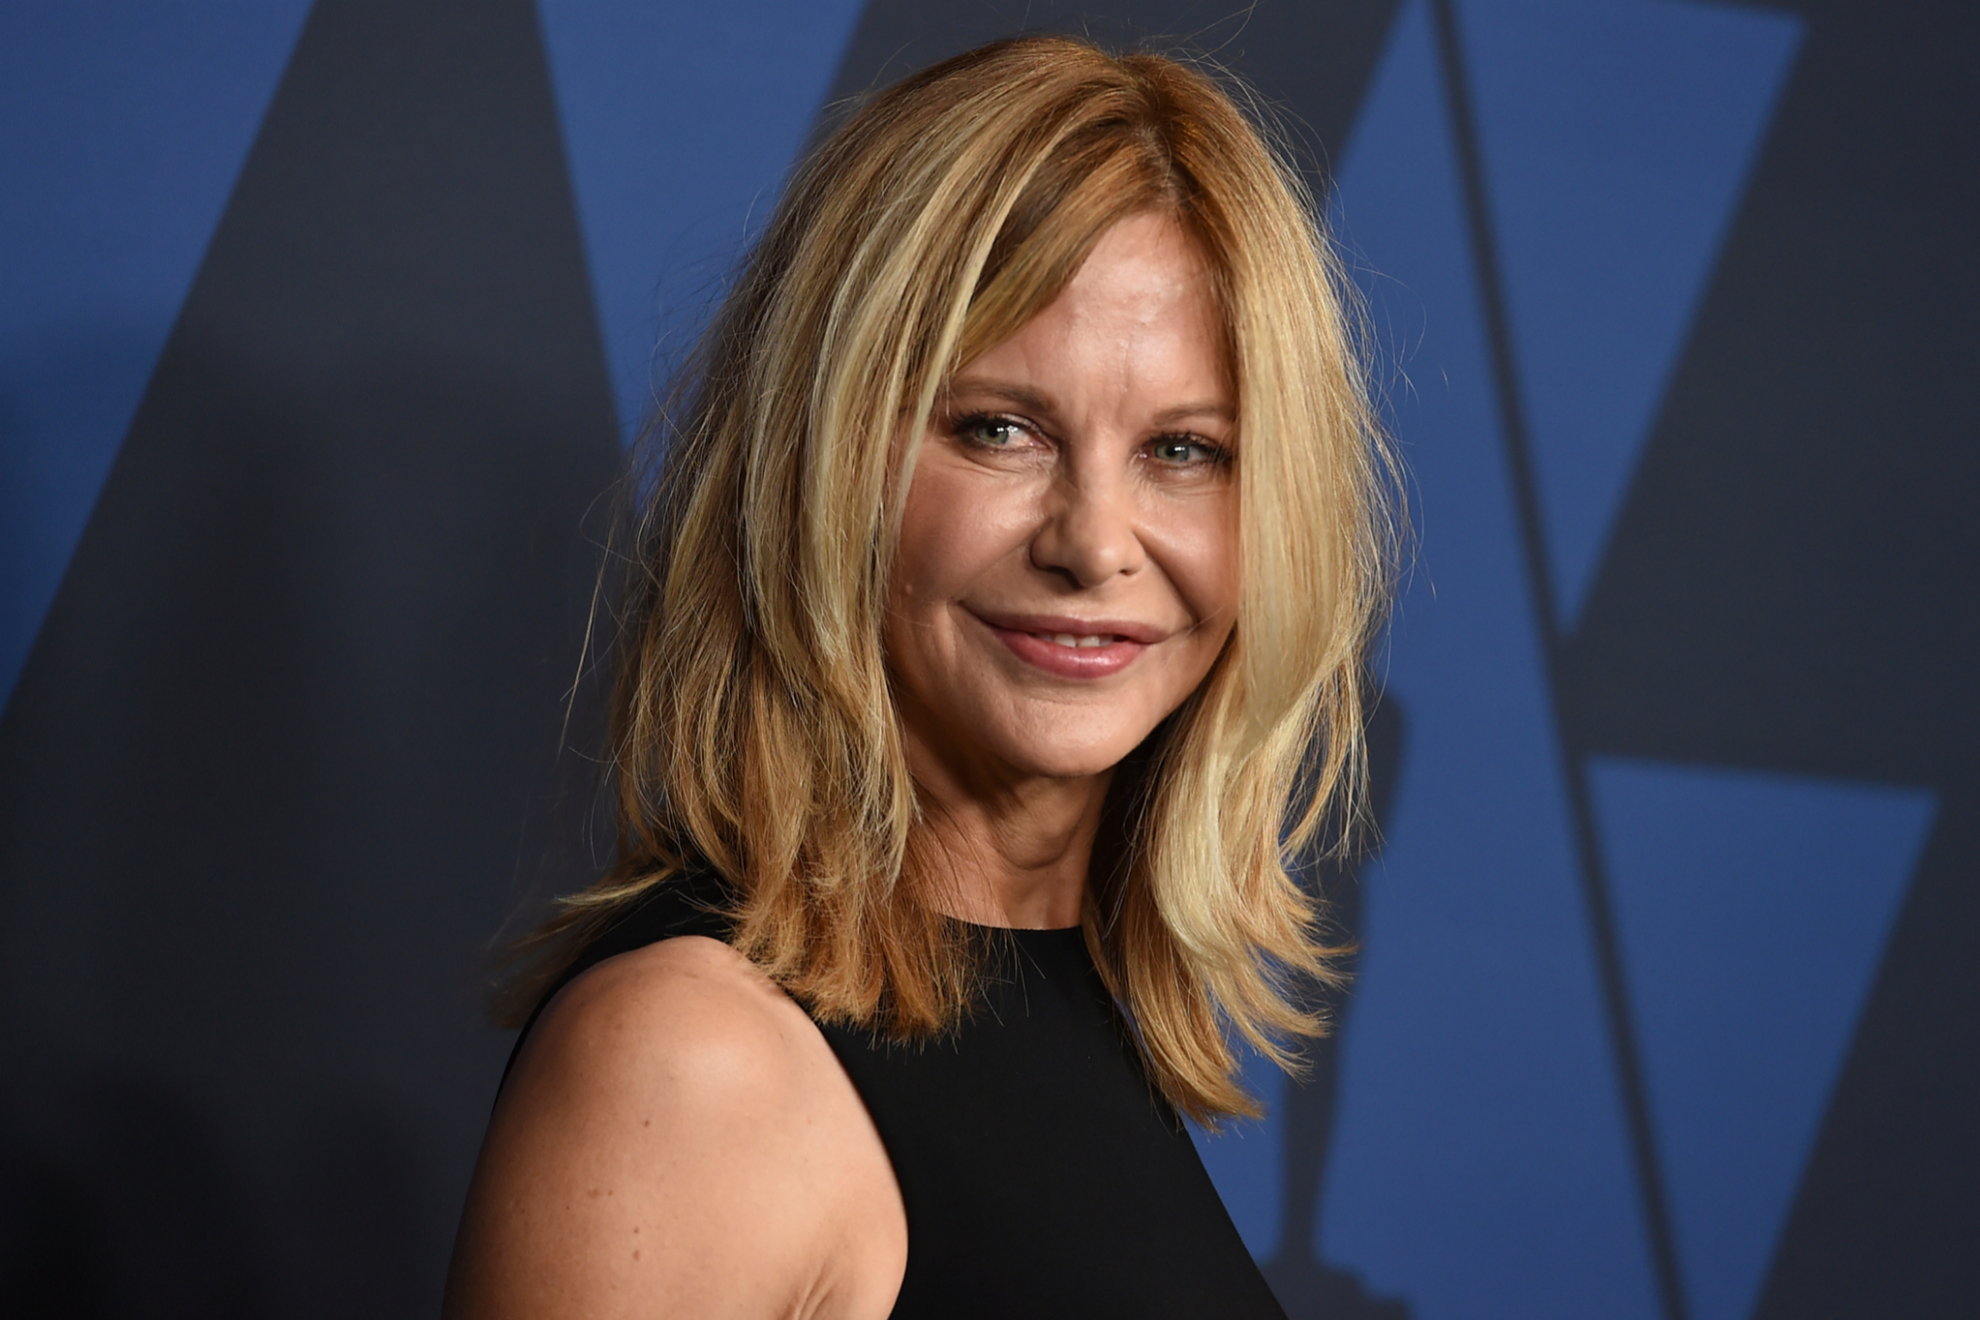 Meg Ryan Made A Public Appearance To Support Michael J. Fox